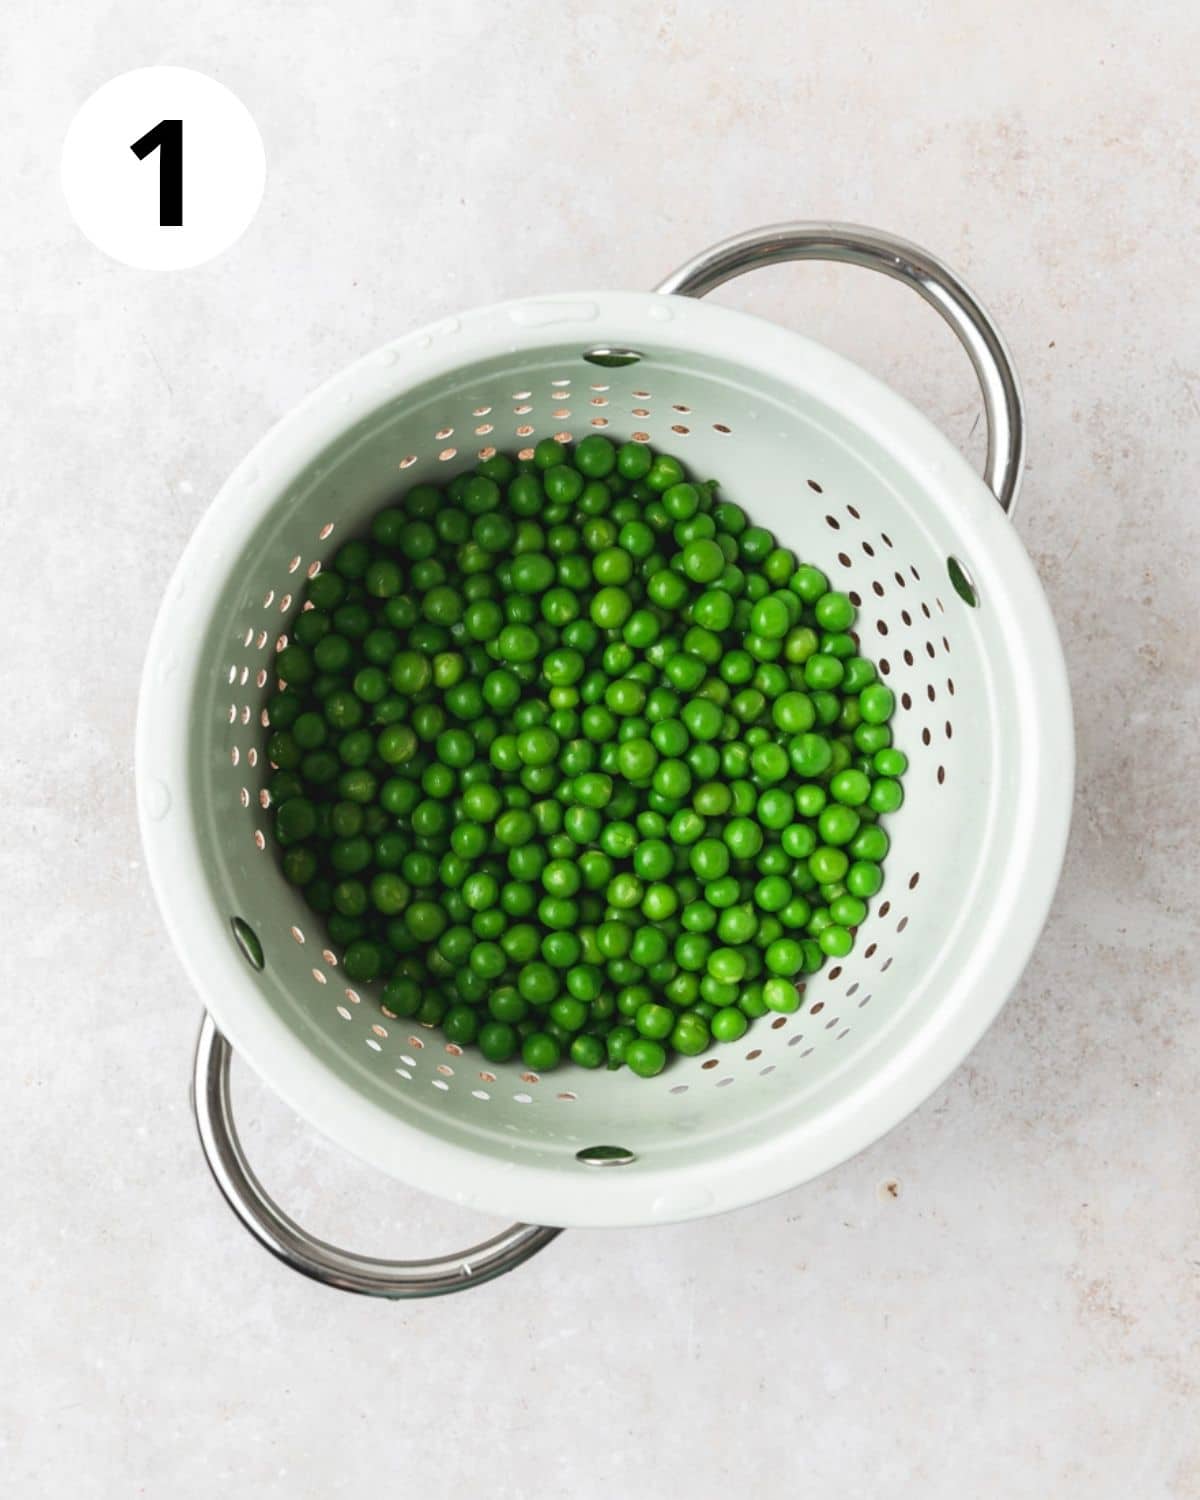 blanched peas in strainer.